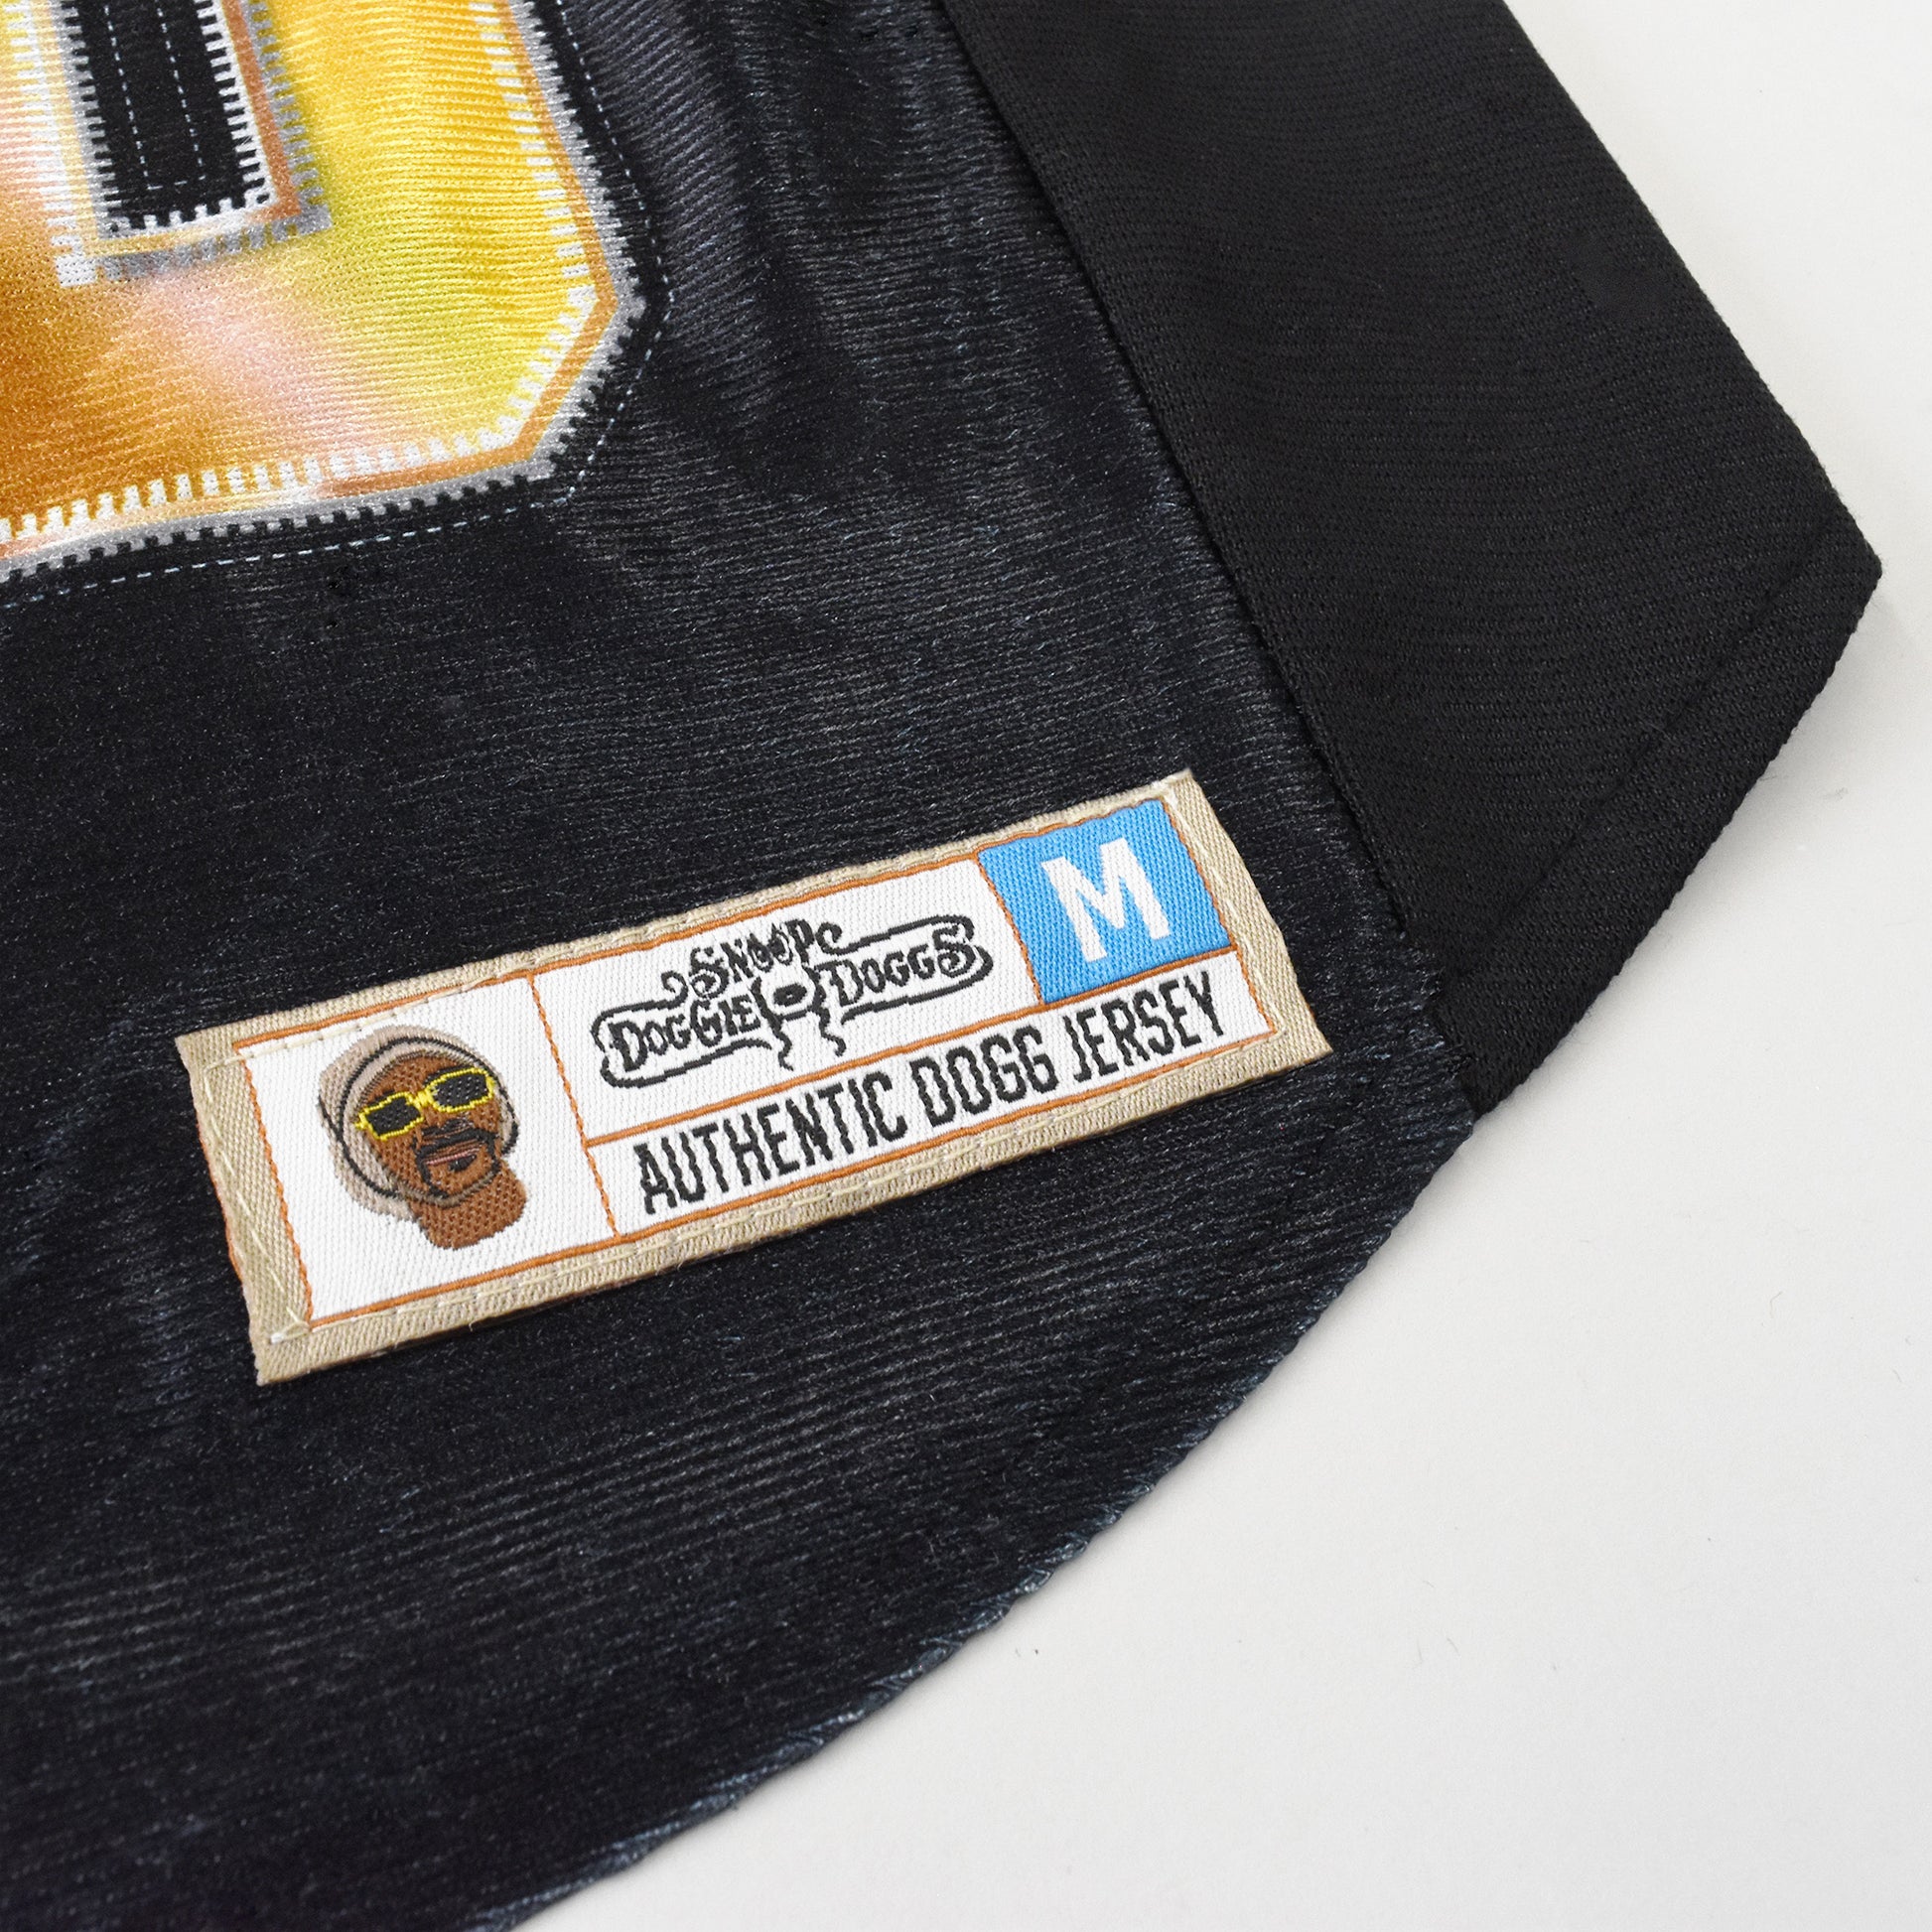 A close up detail image showing design sublimation, stretch fabric, and embroidered jersey tag of the Off The Chain Deluxe Pet Jersey.